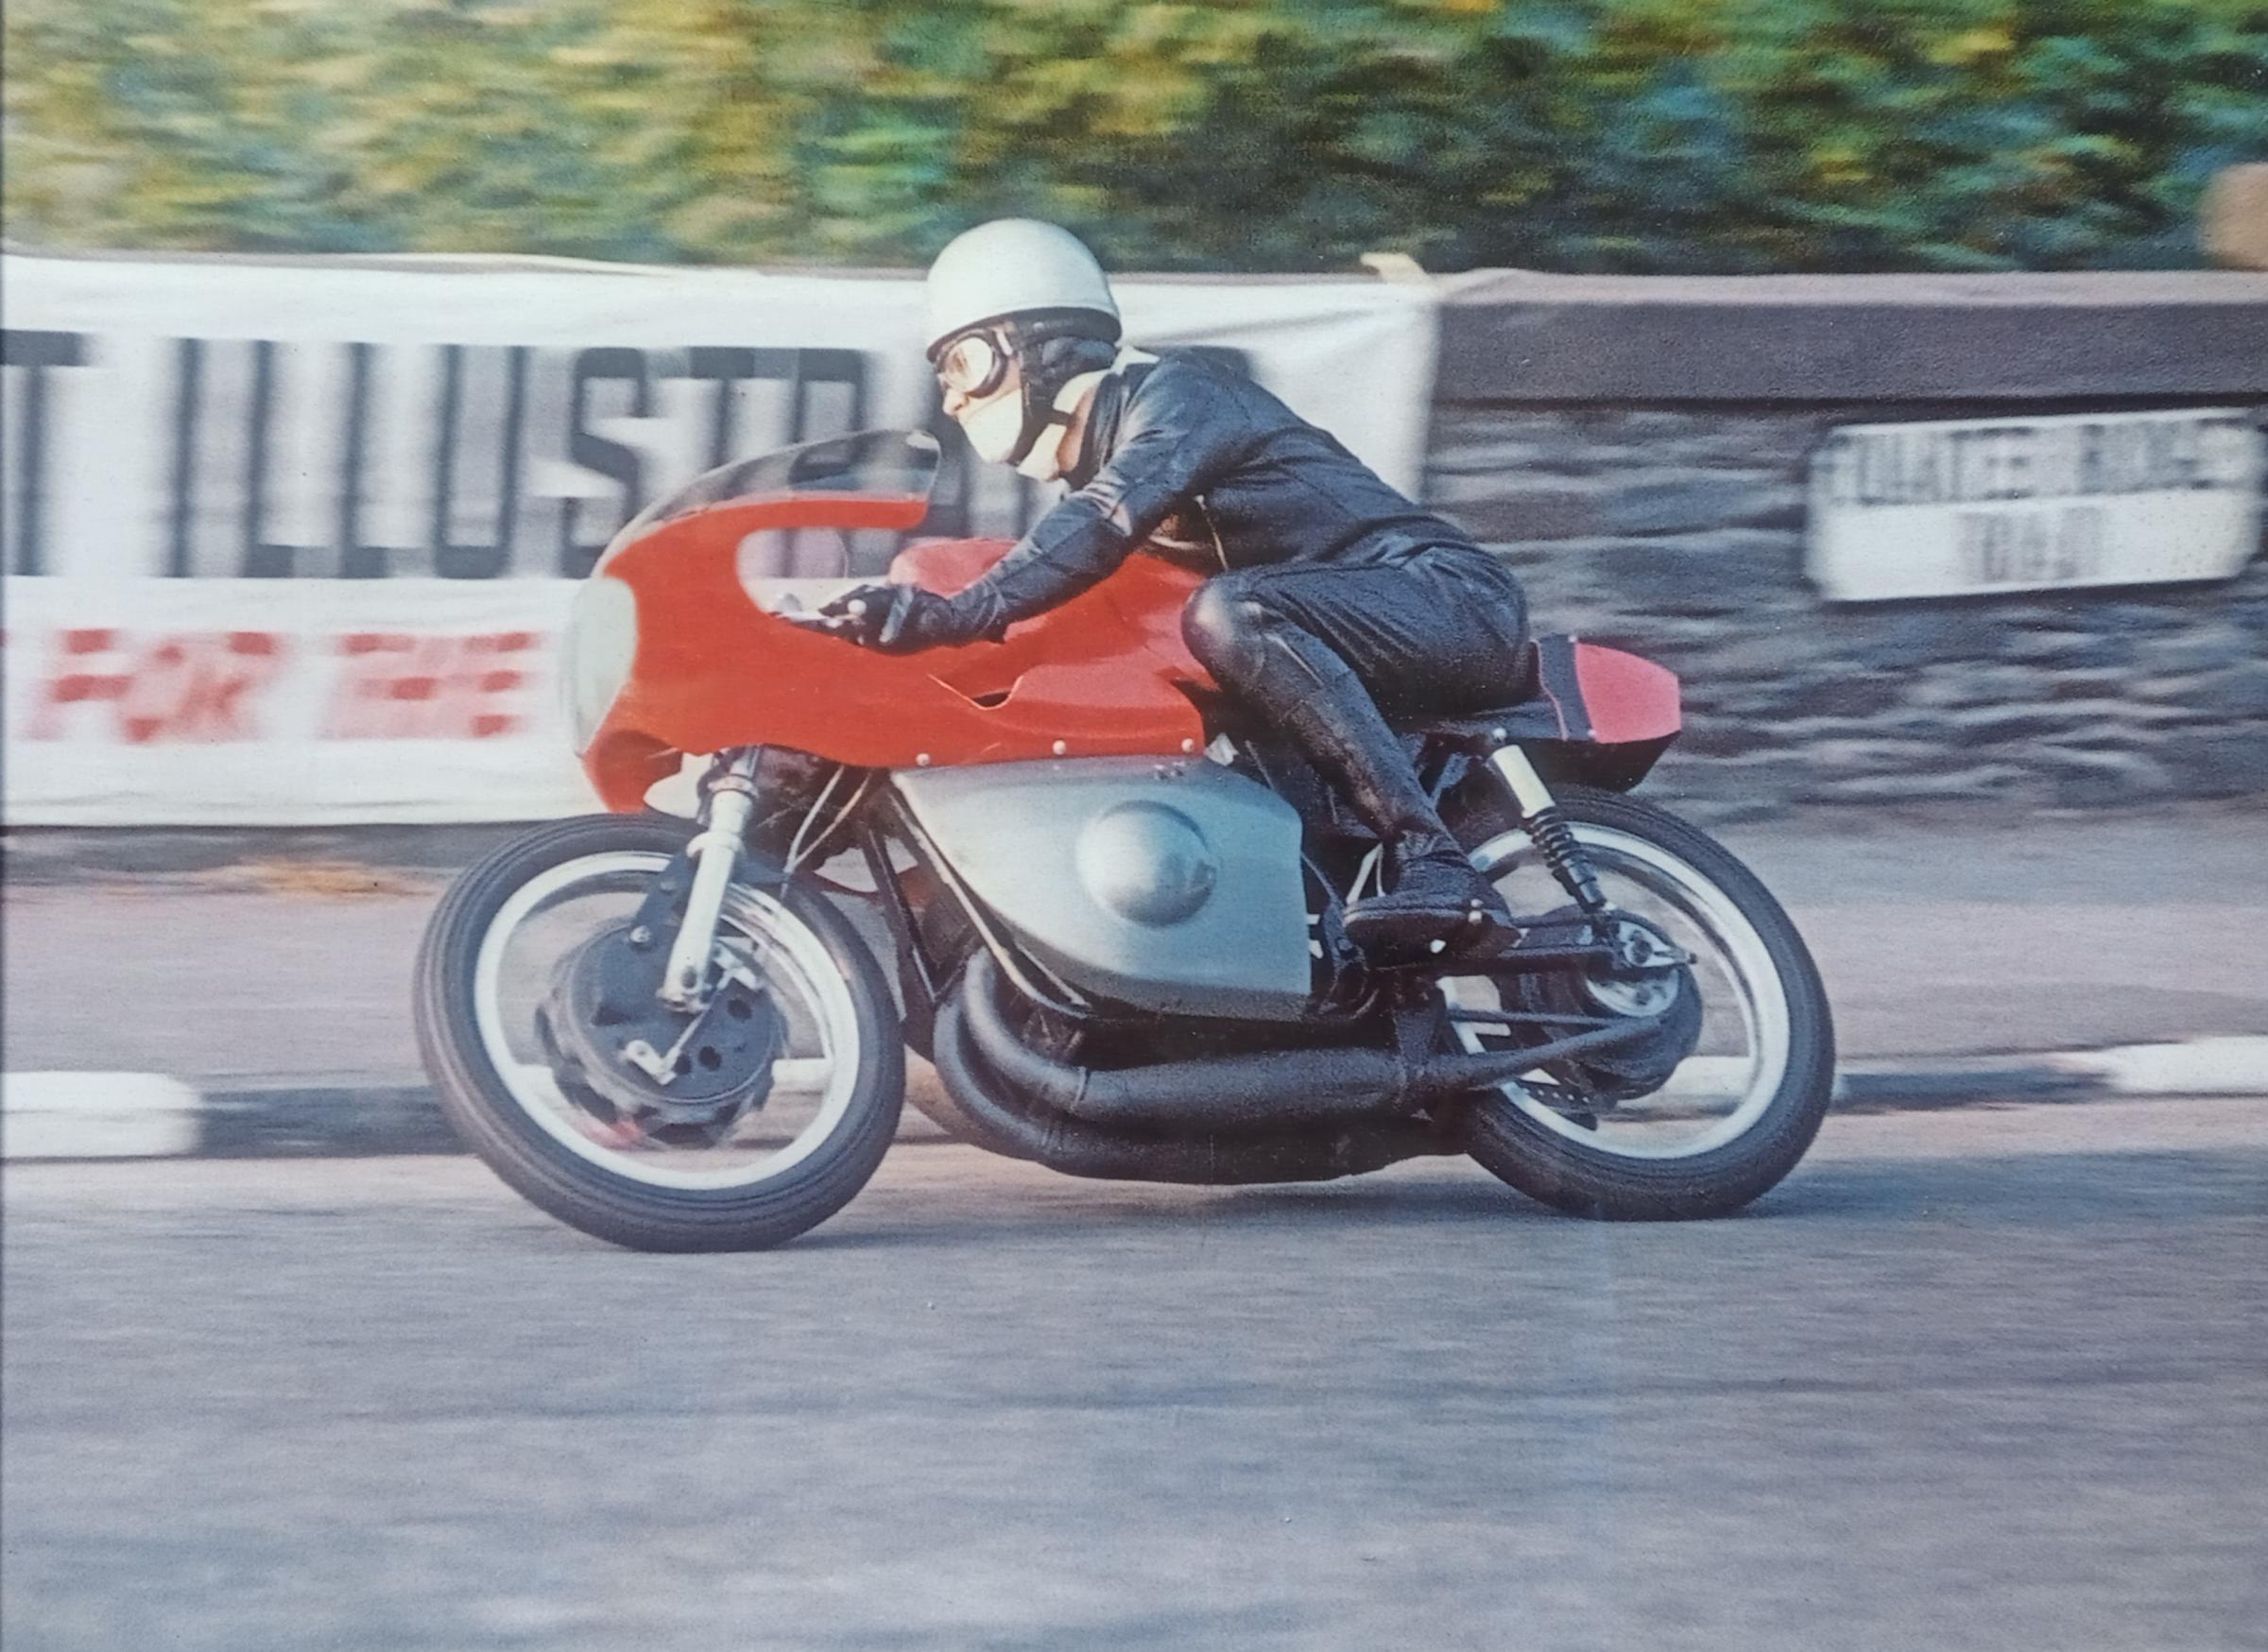 David Thomas in action during practive at the Isle of Man, 1969.